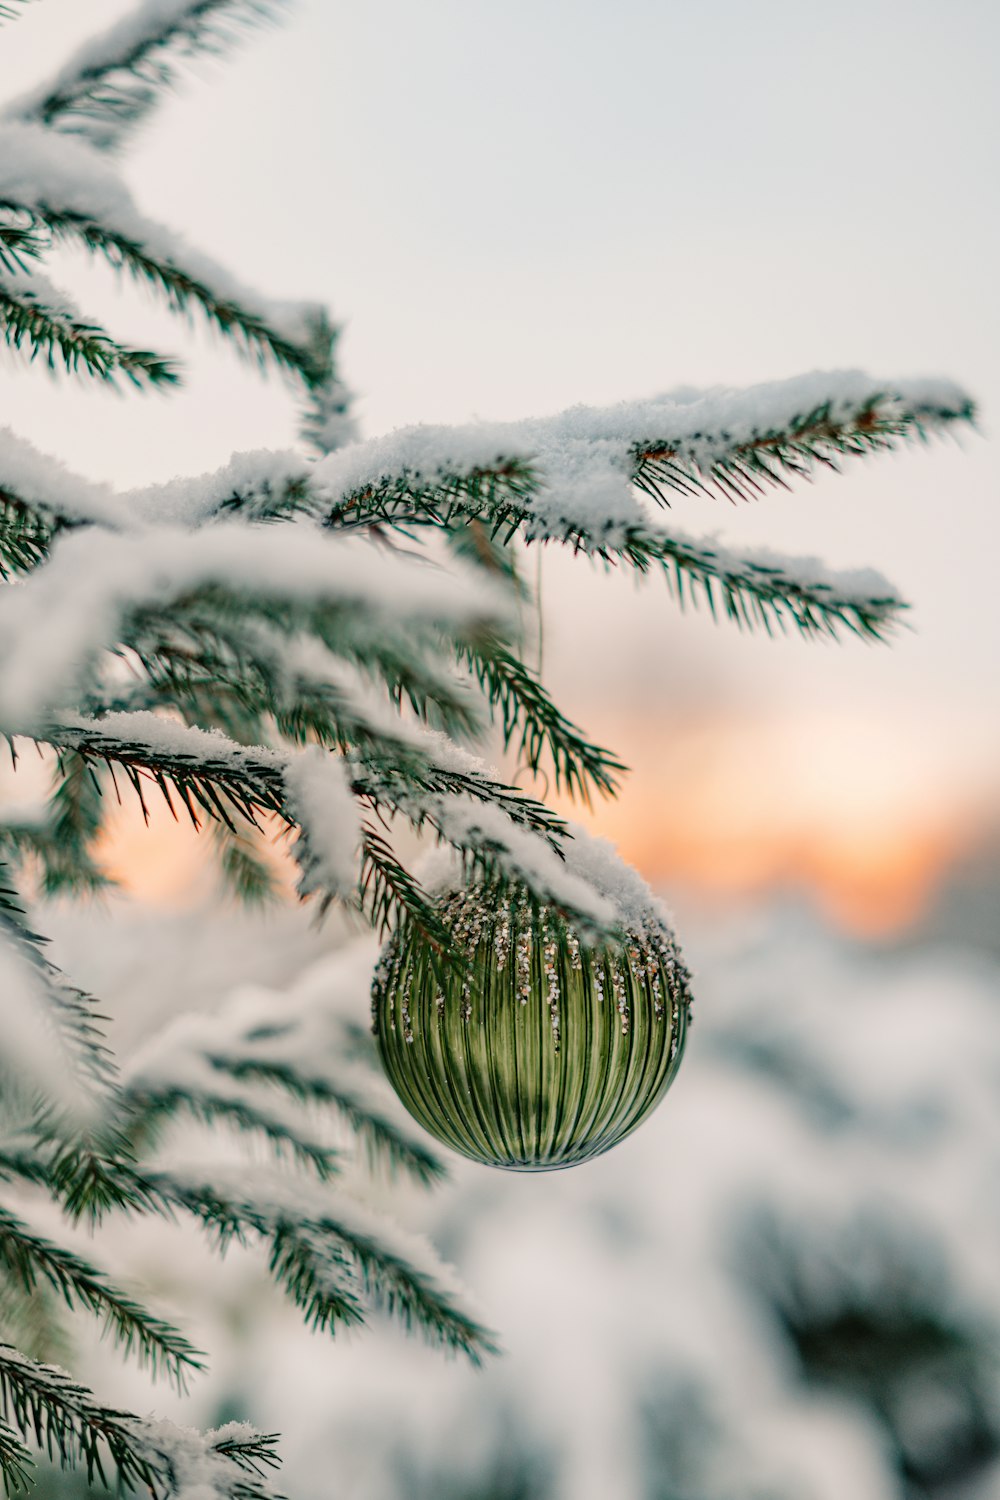 a pine tree with a snow covered pine cone